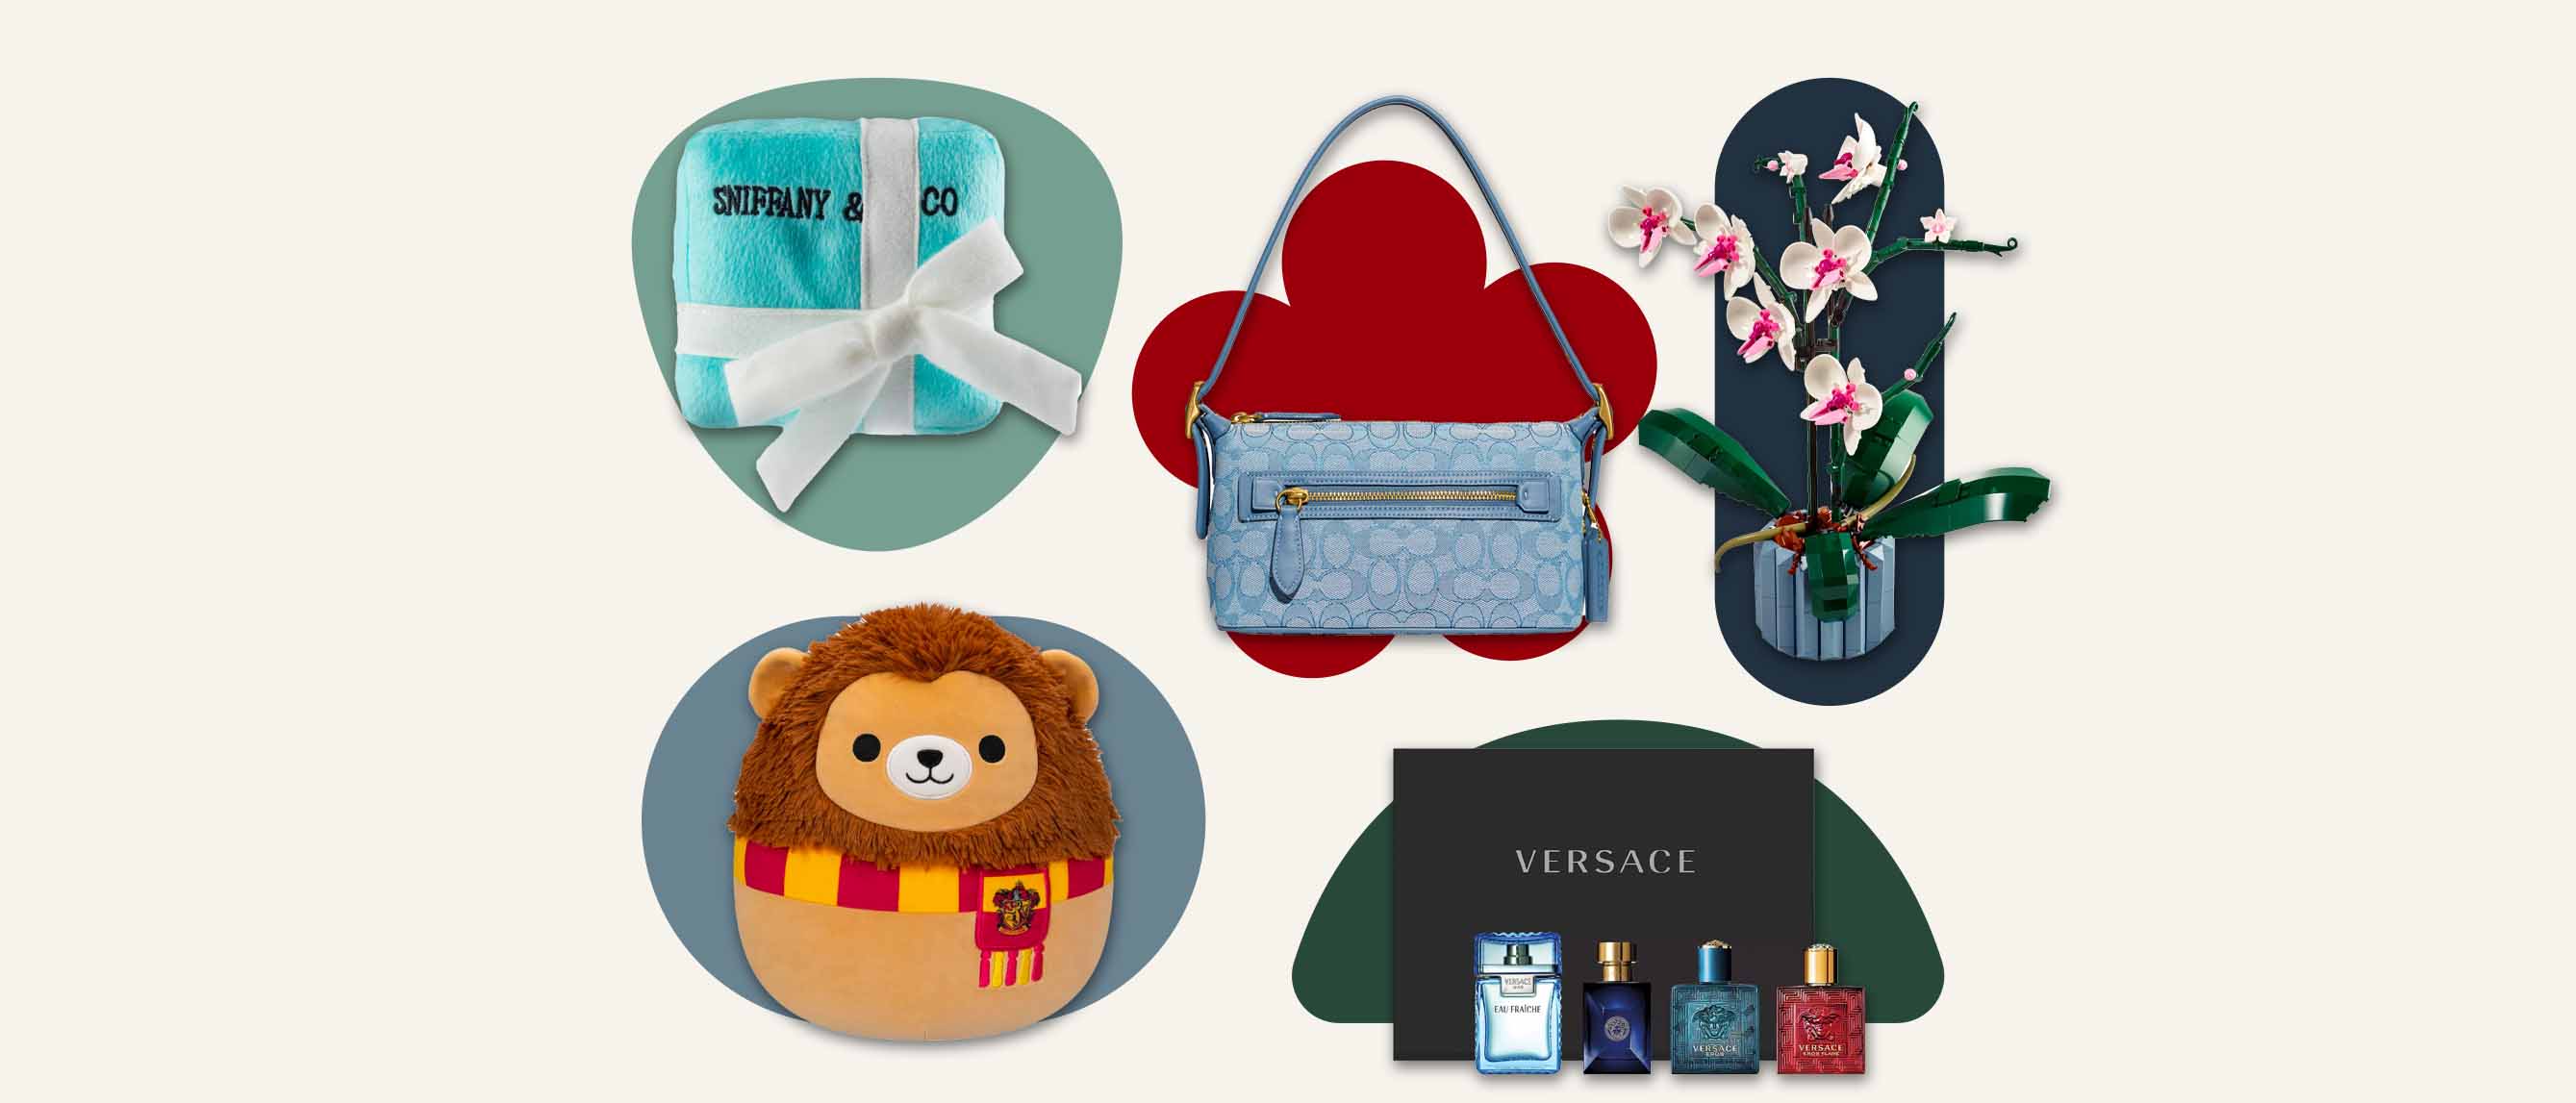 sniffany and co dog toy, harry potter squishmallow, coach bag, lego orchid and versace mini cologne set on coloured collage 